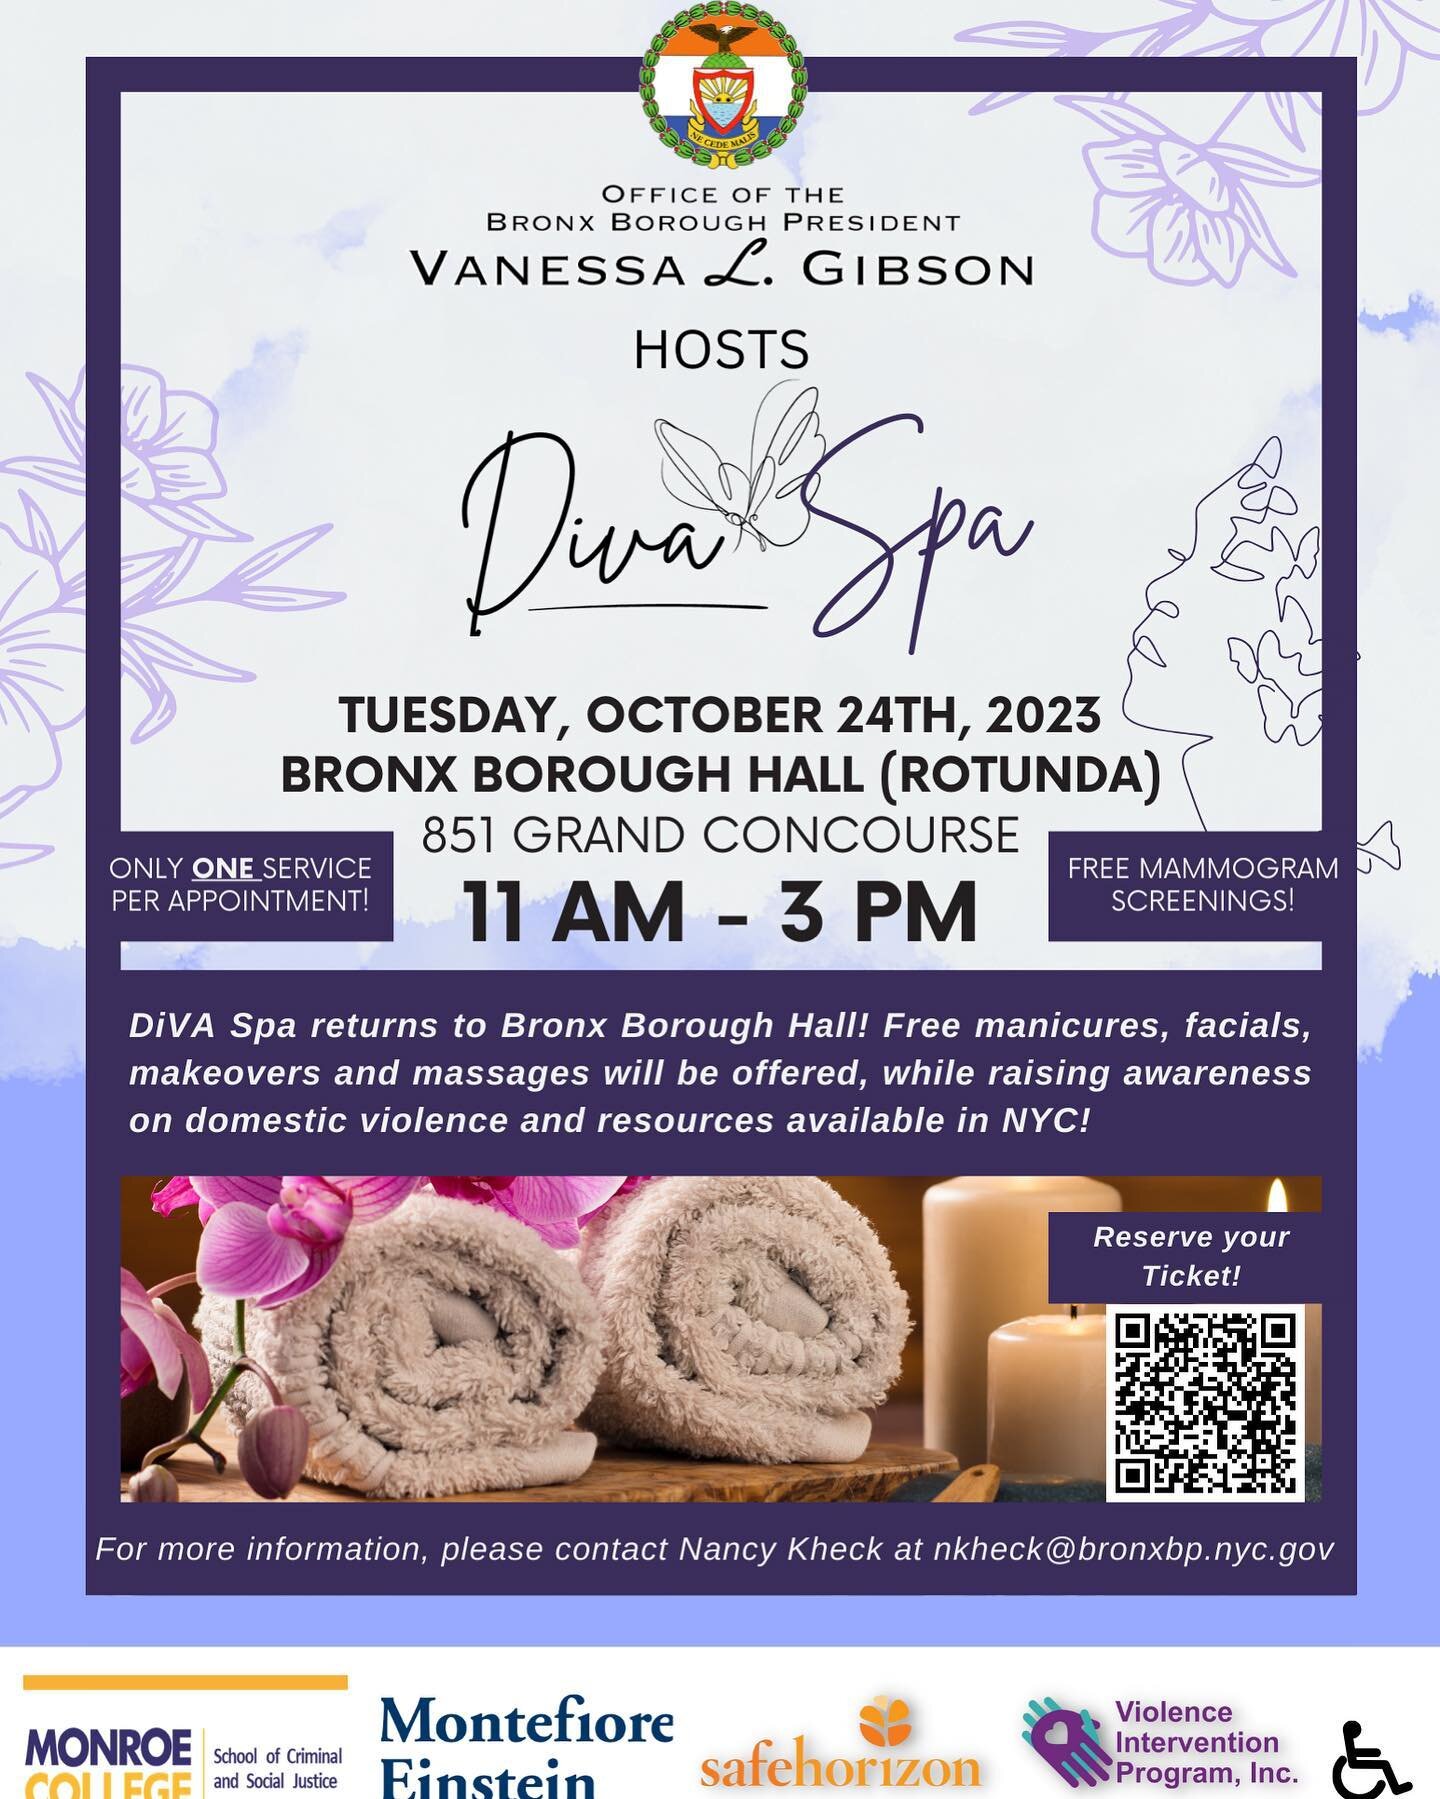 DiVA Spa returns to Bronx Borough Hall! Veteran's Memorial Hall will be transformed into a fully operational salon offering free manicures, facials, makeovers, and massages while raising awareness of 
domestic violence and resources available in NYC.